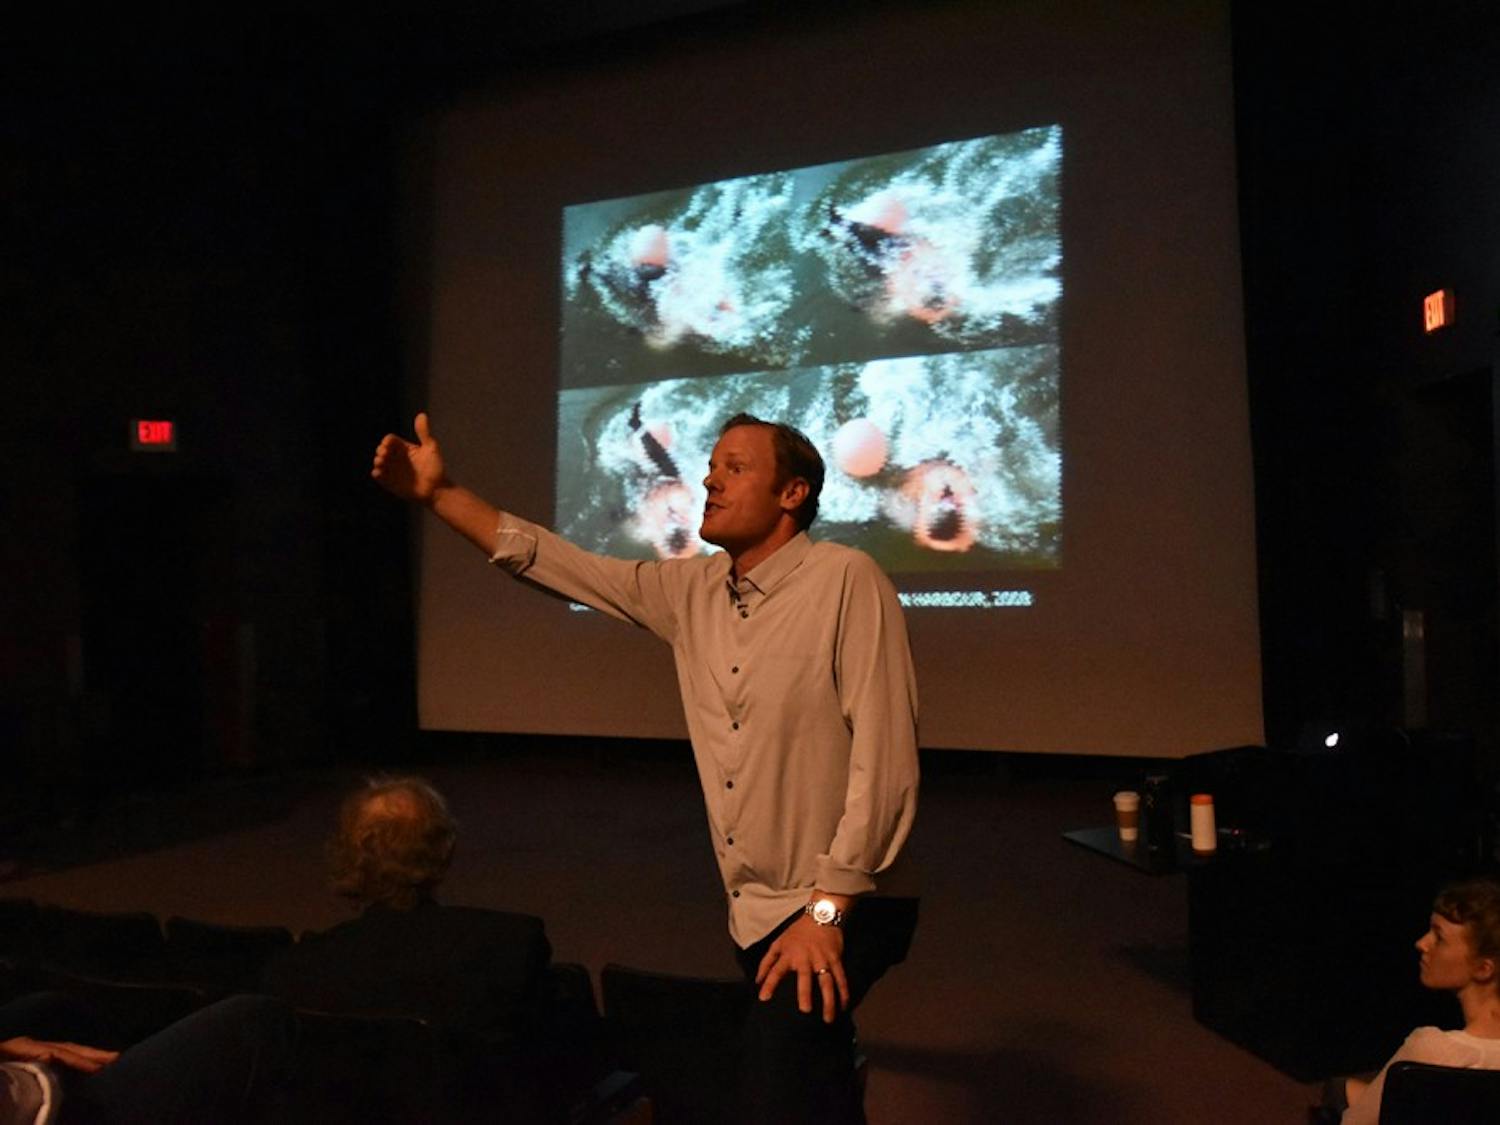 Craig Smith lectures students on Tuesday evening at Hanes Art Center.